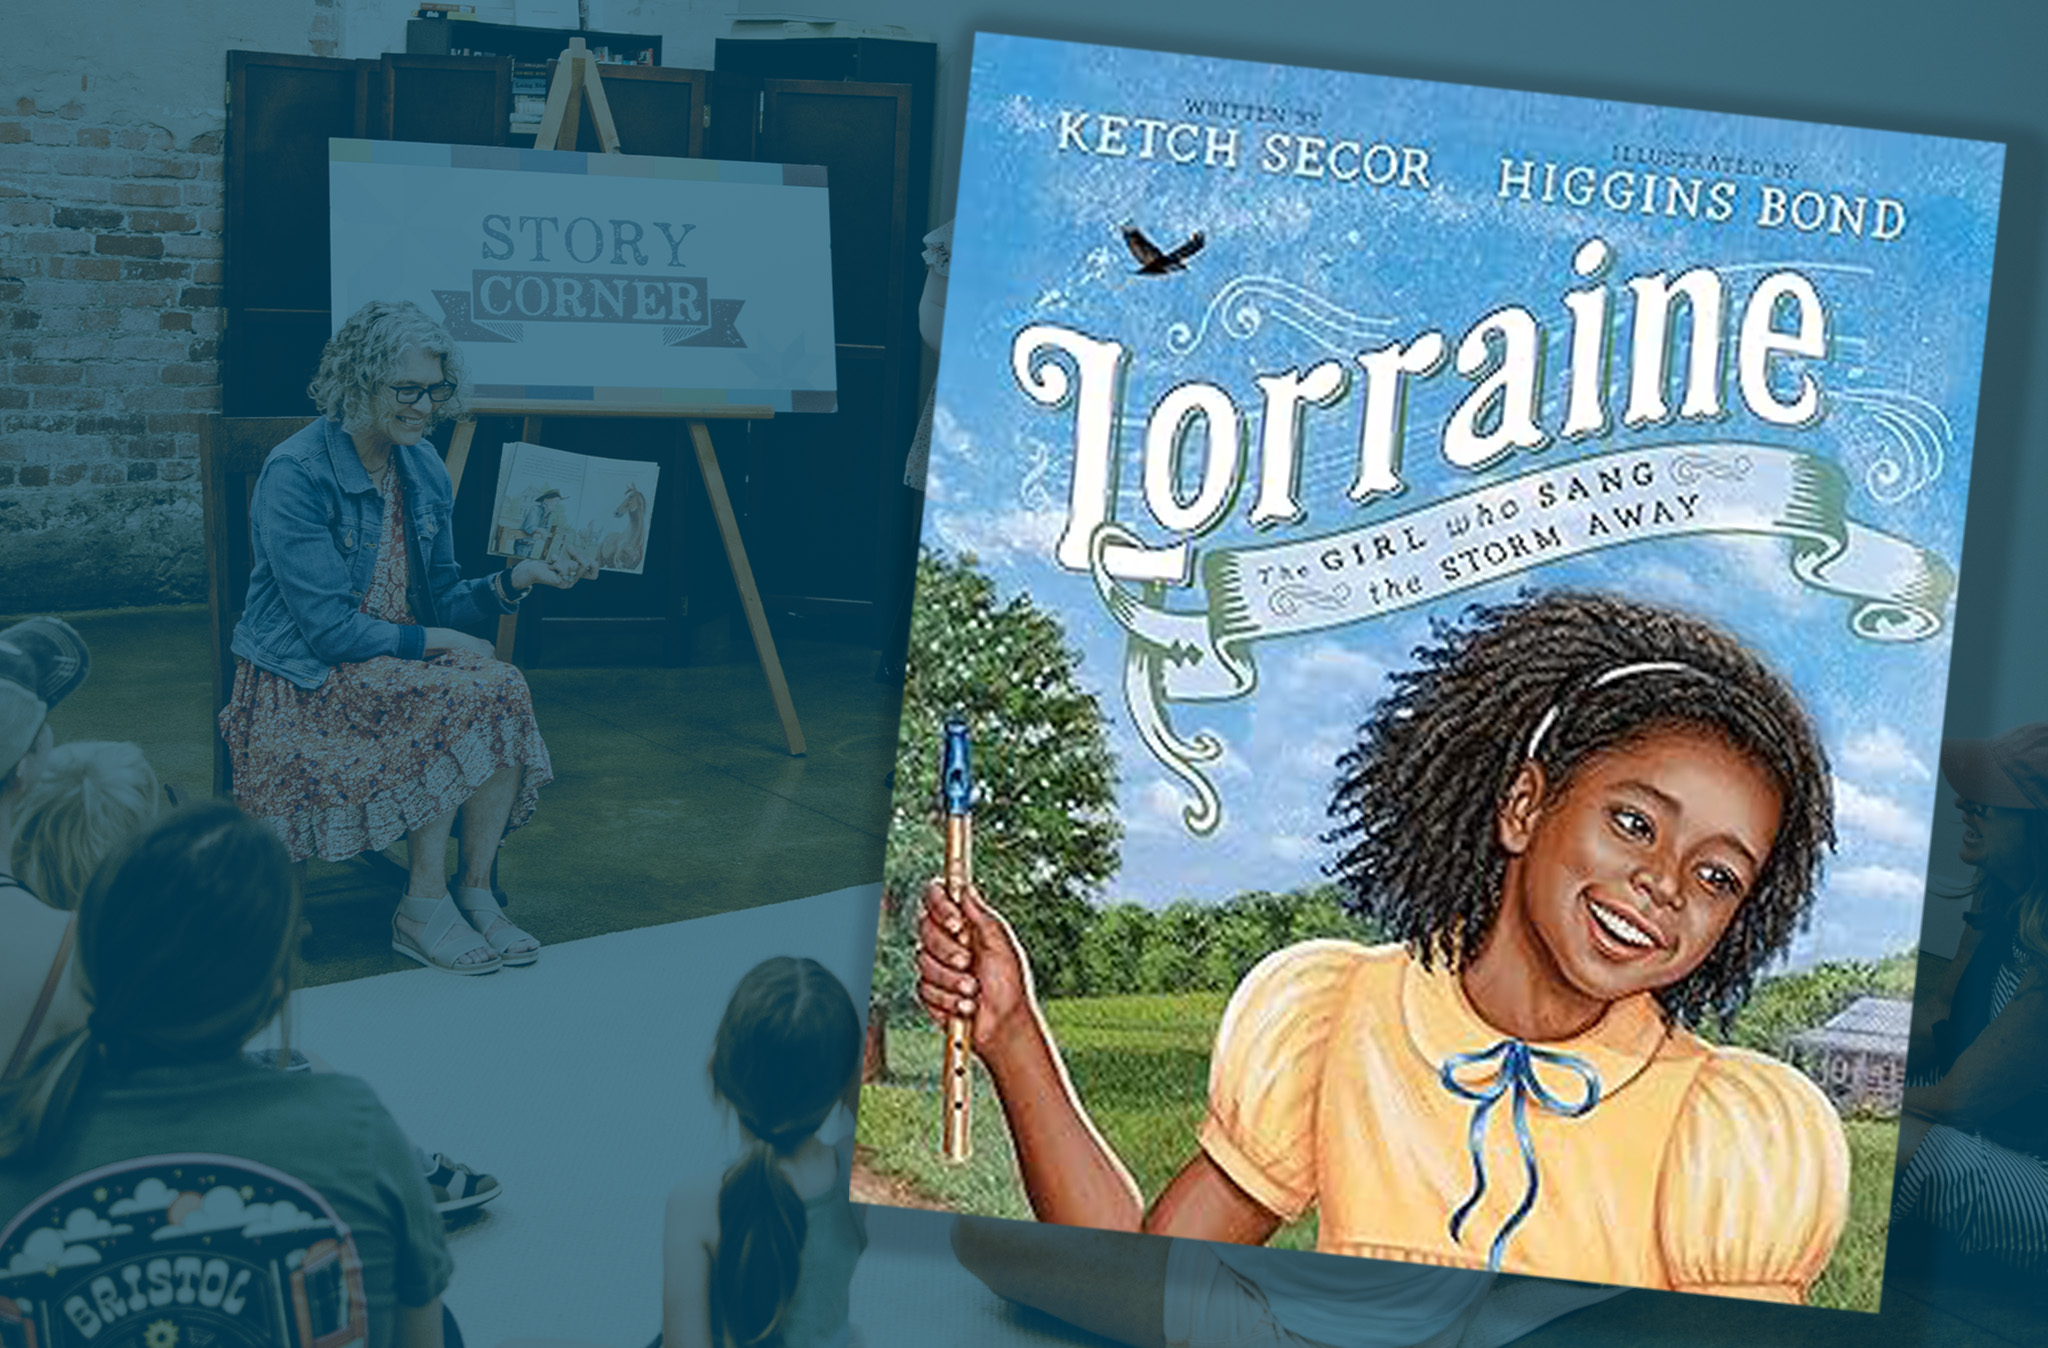 Museum Story Time – “Lorraine: The Girl Who Sang the Storm Away” by Ketch Secor